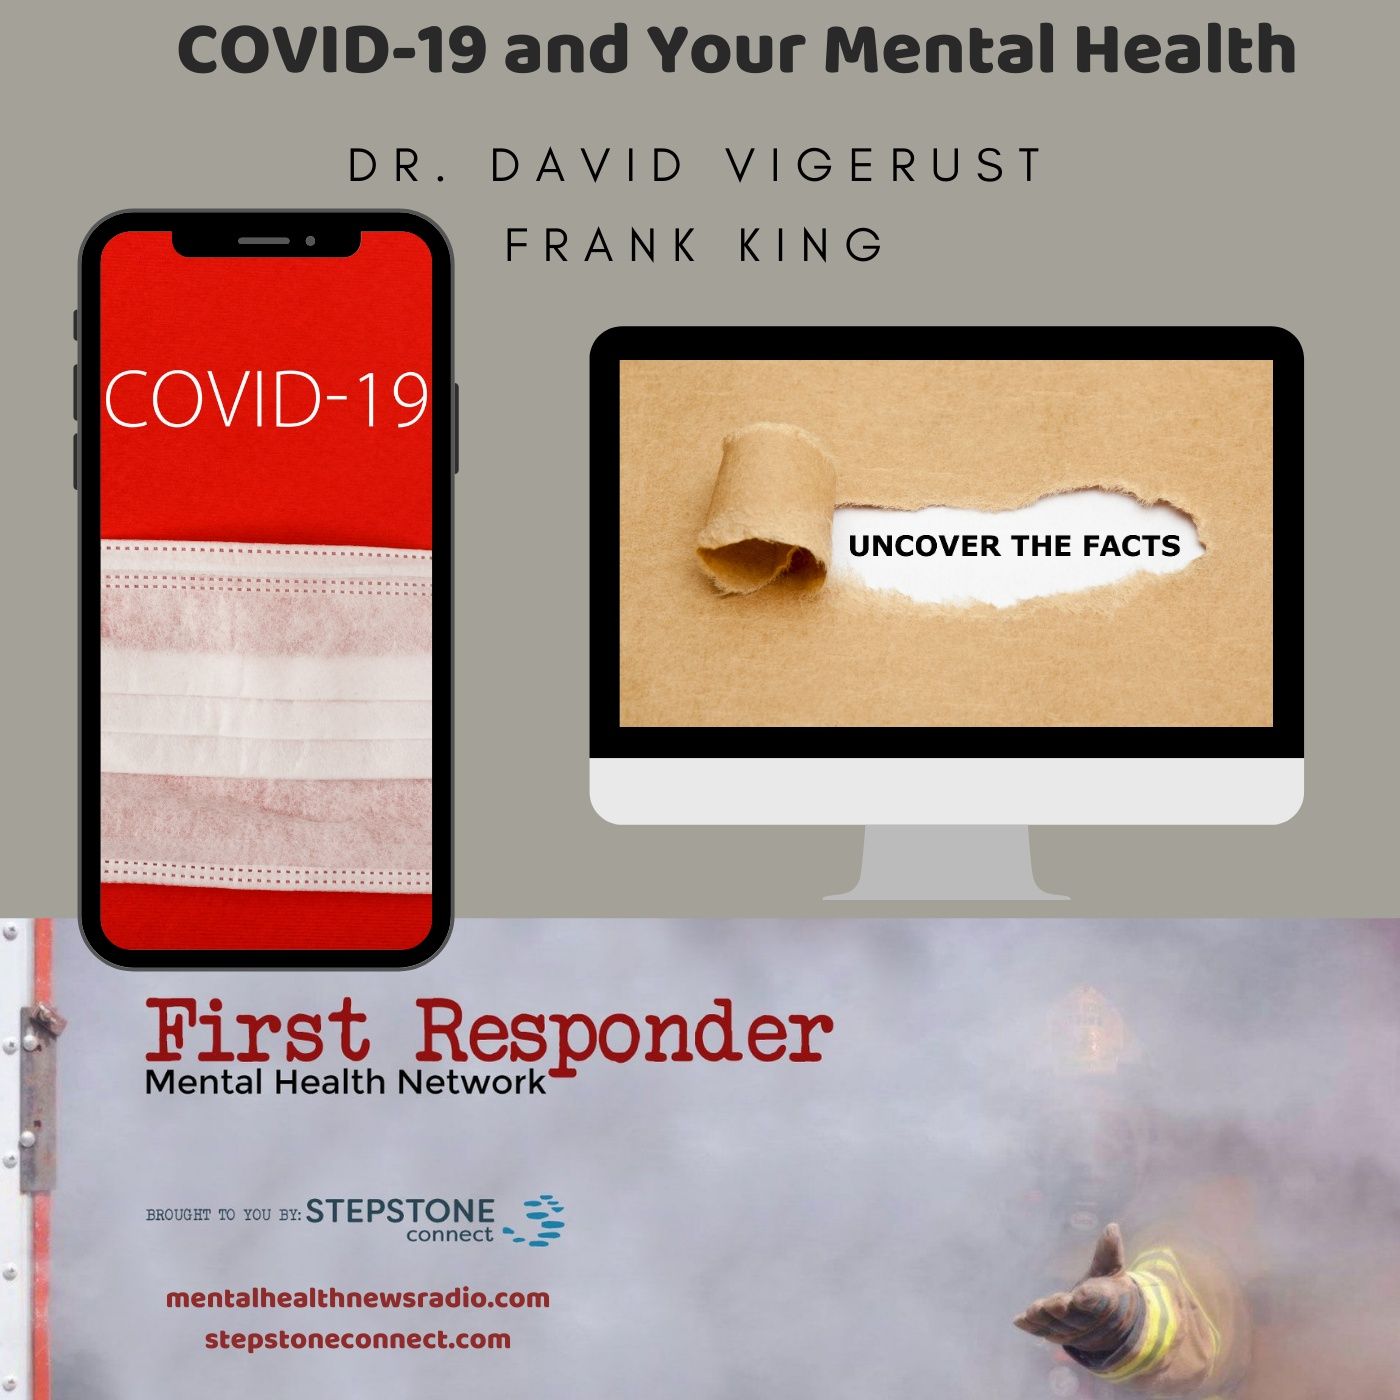 Covid-19 and Your Mental Health